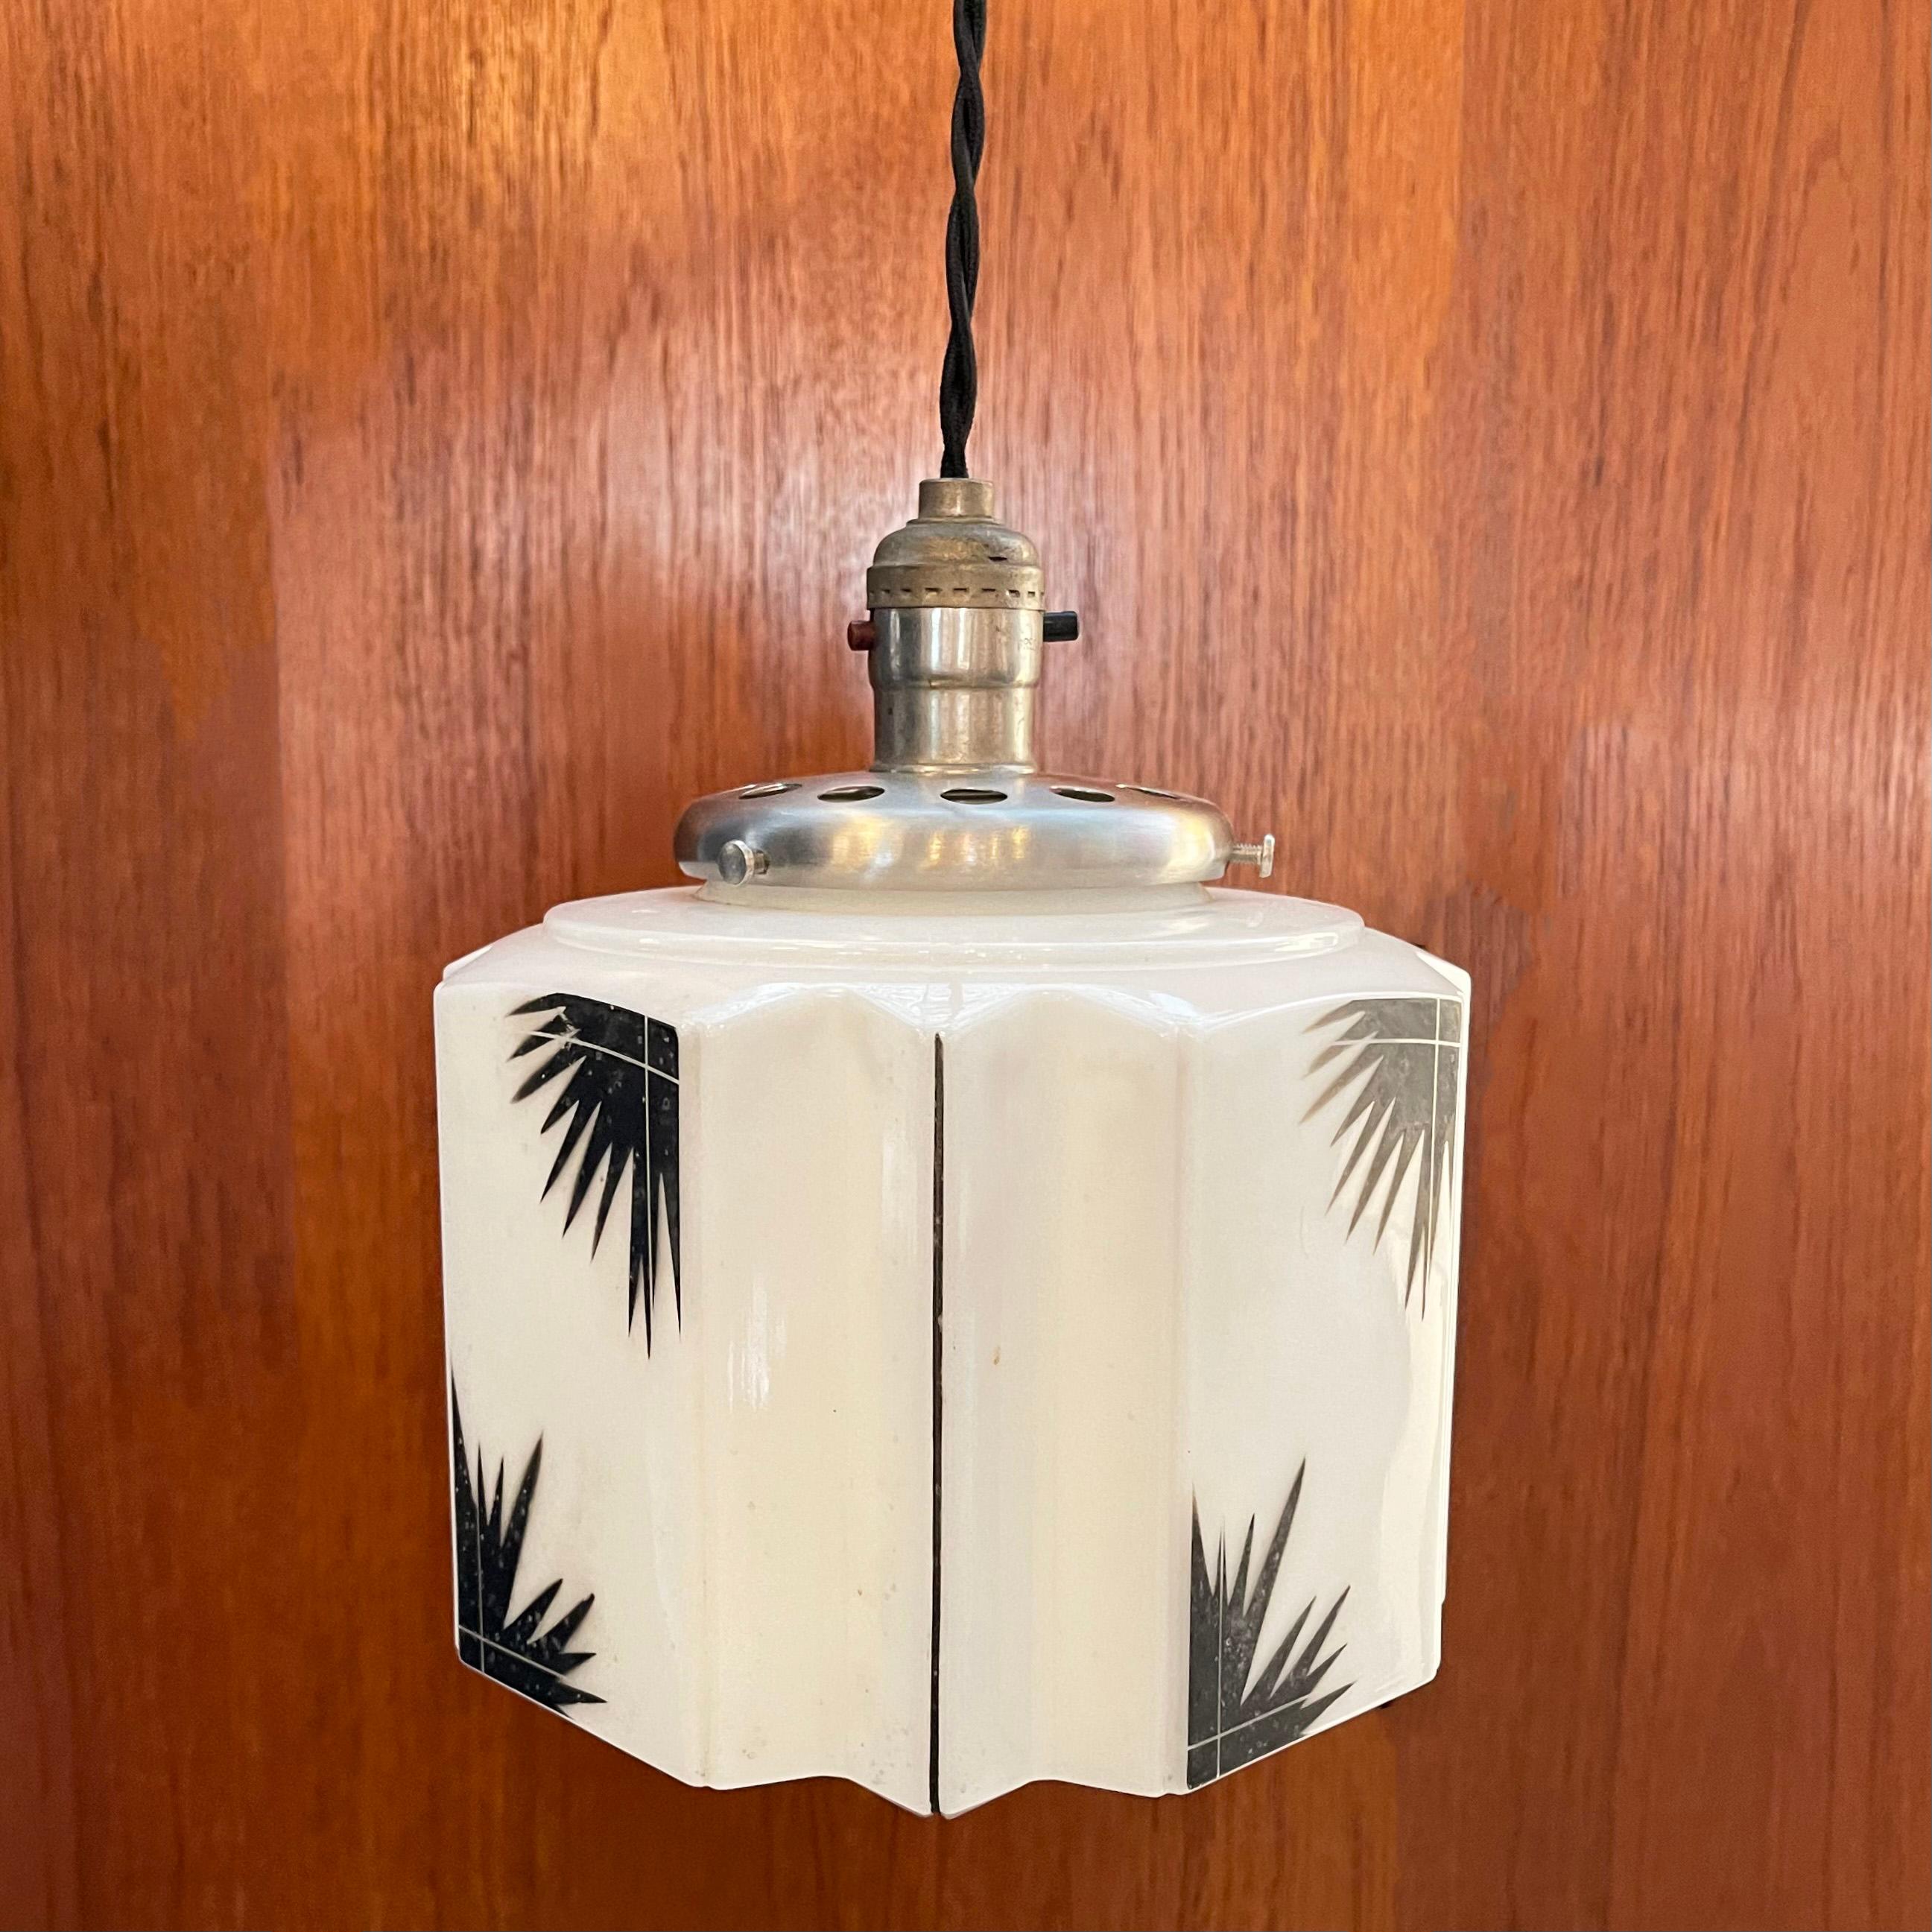 Art Deco pendant light features a faceted, milk glass shade with leaf pattern on a brushed nickel fitter is newly wired with 40 inches of braided cloth cord.